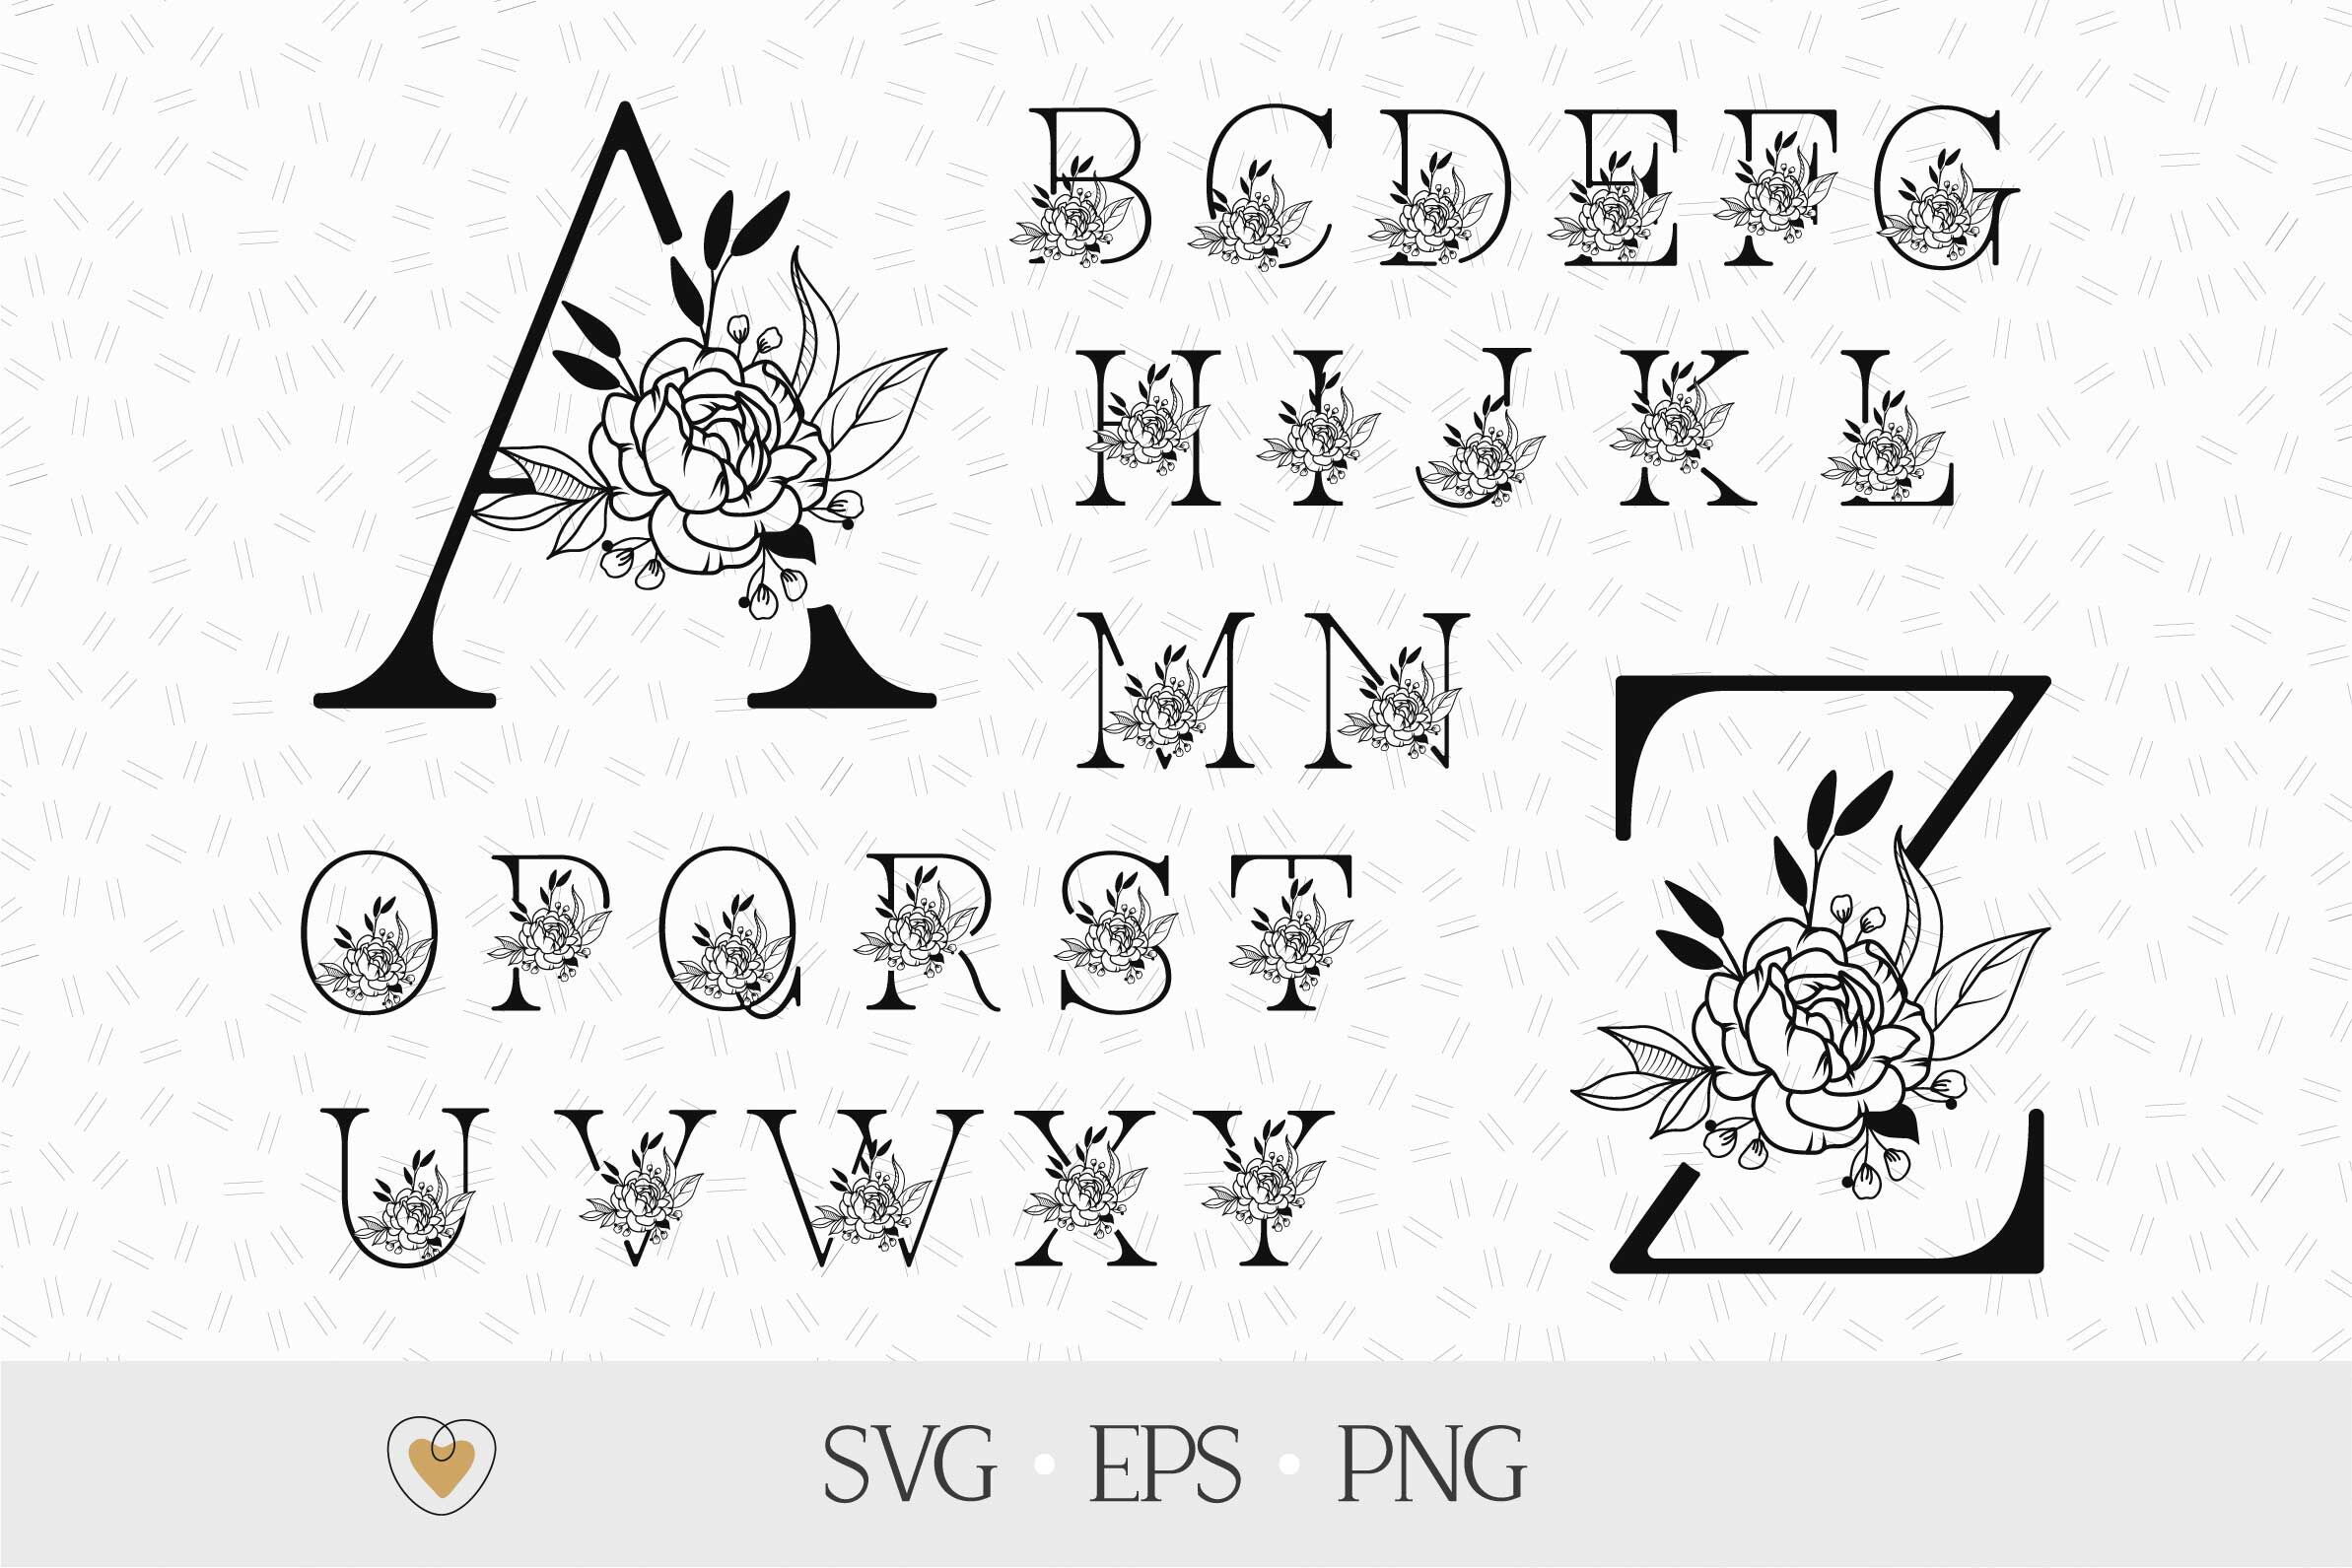 Download Flower Alphabet Svg Floral Letters Svg Peony Flower By Pretty Meerkat Thehungryjpeg Com